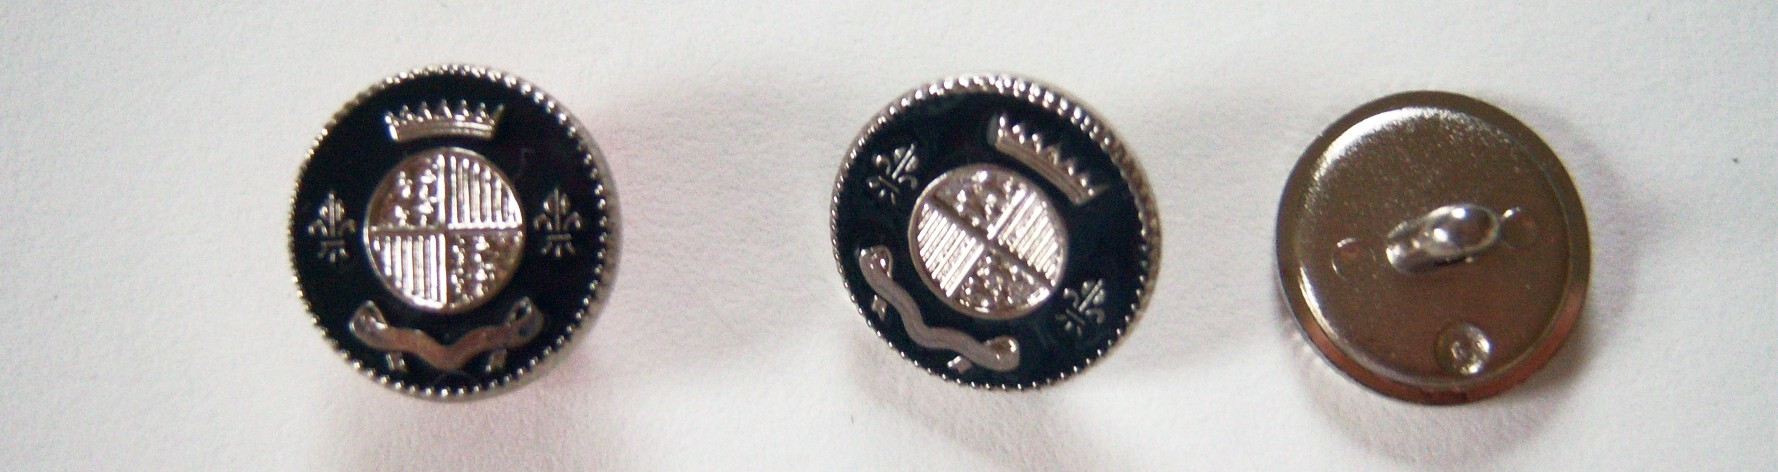 Black/Silver Crest 5/8" Shank Poly Button